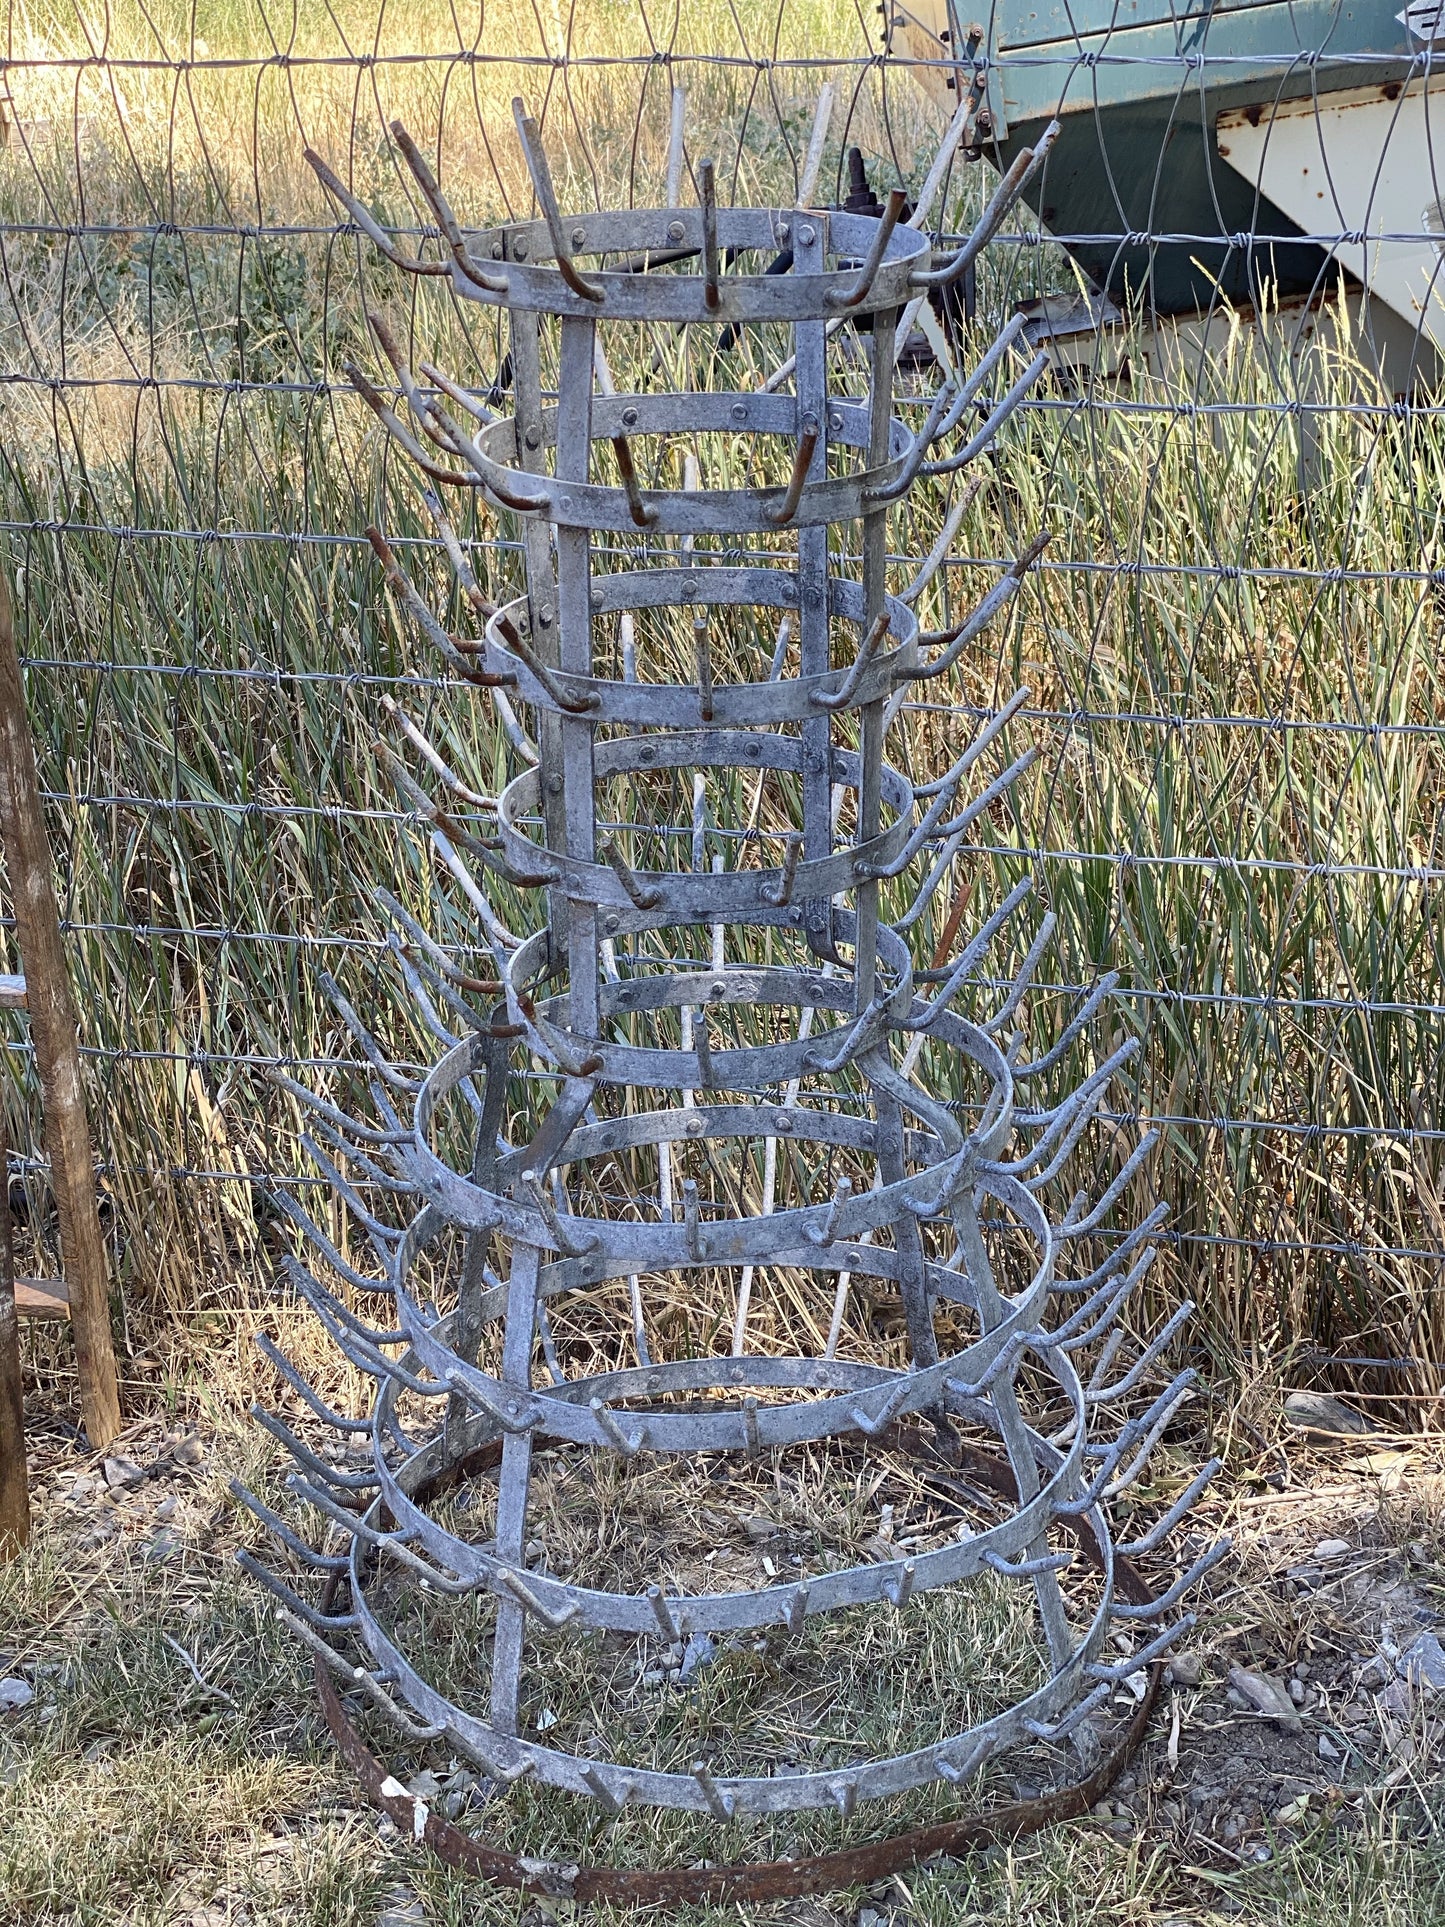 French Antique Bottle Drying Rack